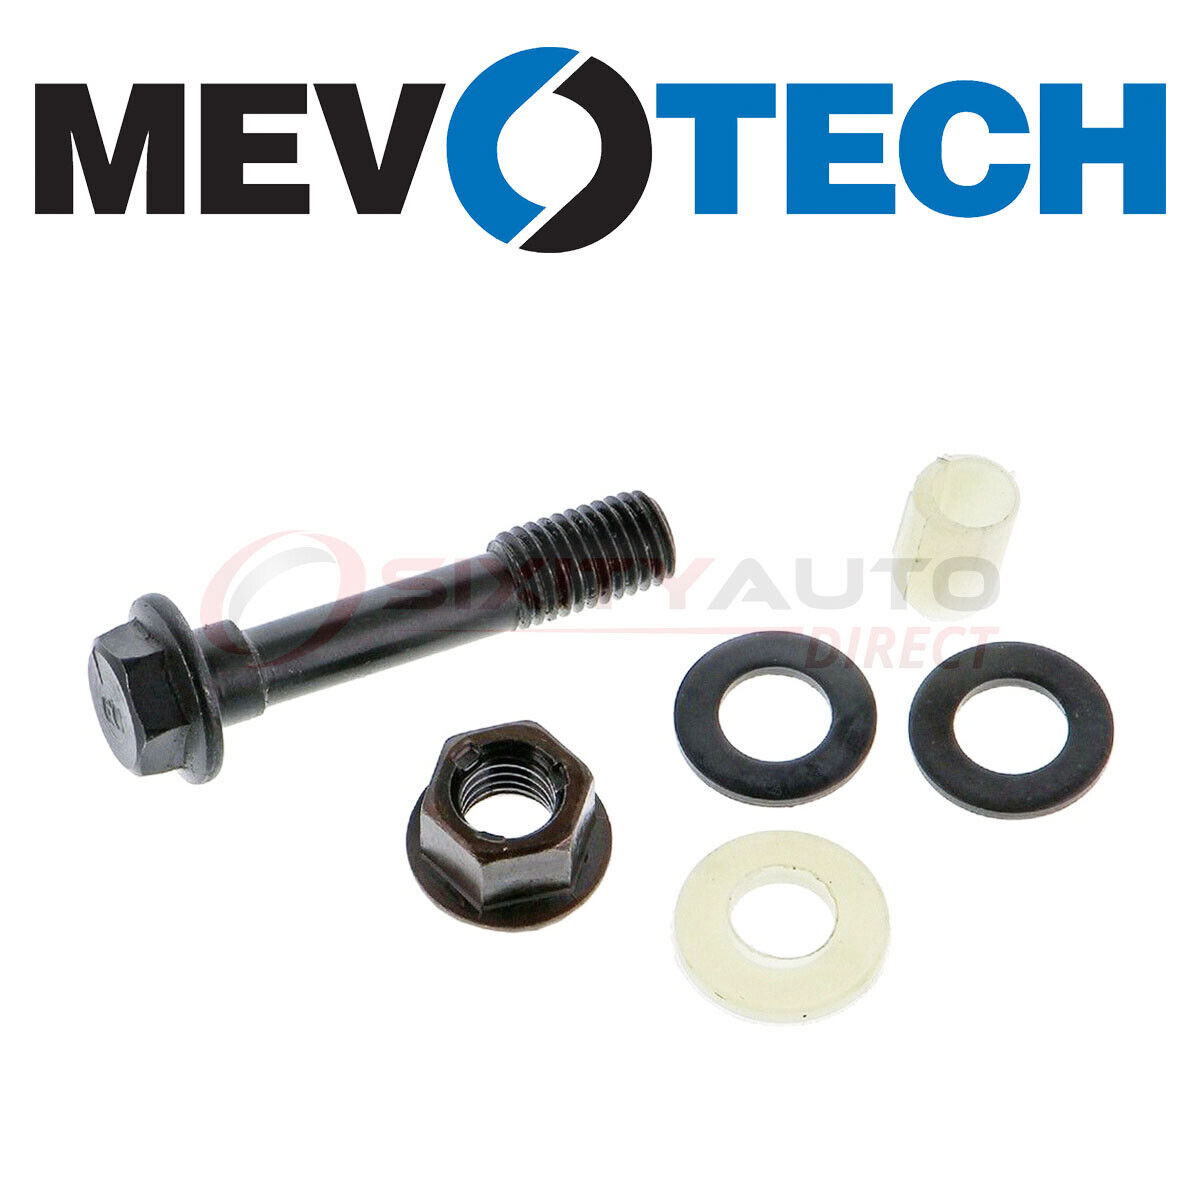 Mevotech Alignment Camber Kit for 1989-1994 Plymouth Acclaim 2.5L 3.0L L4 V6 tj